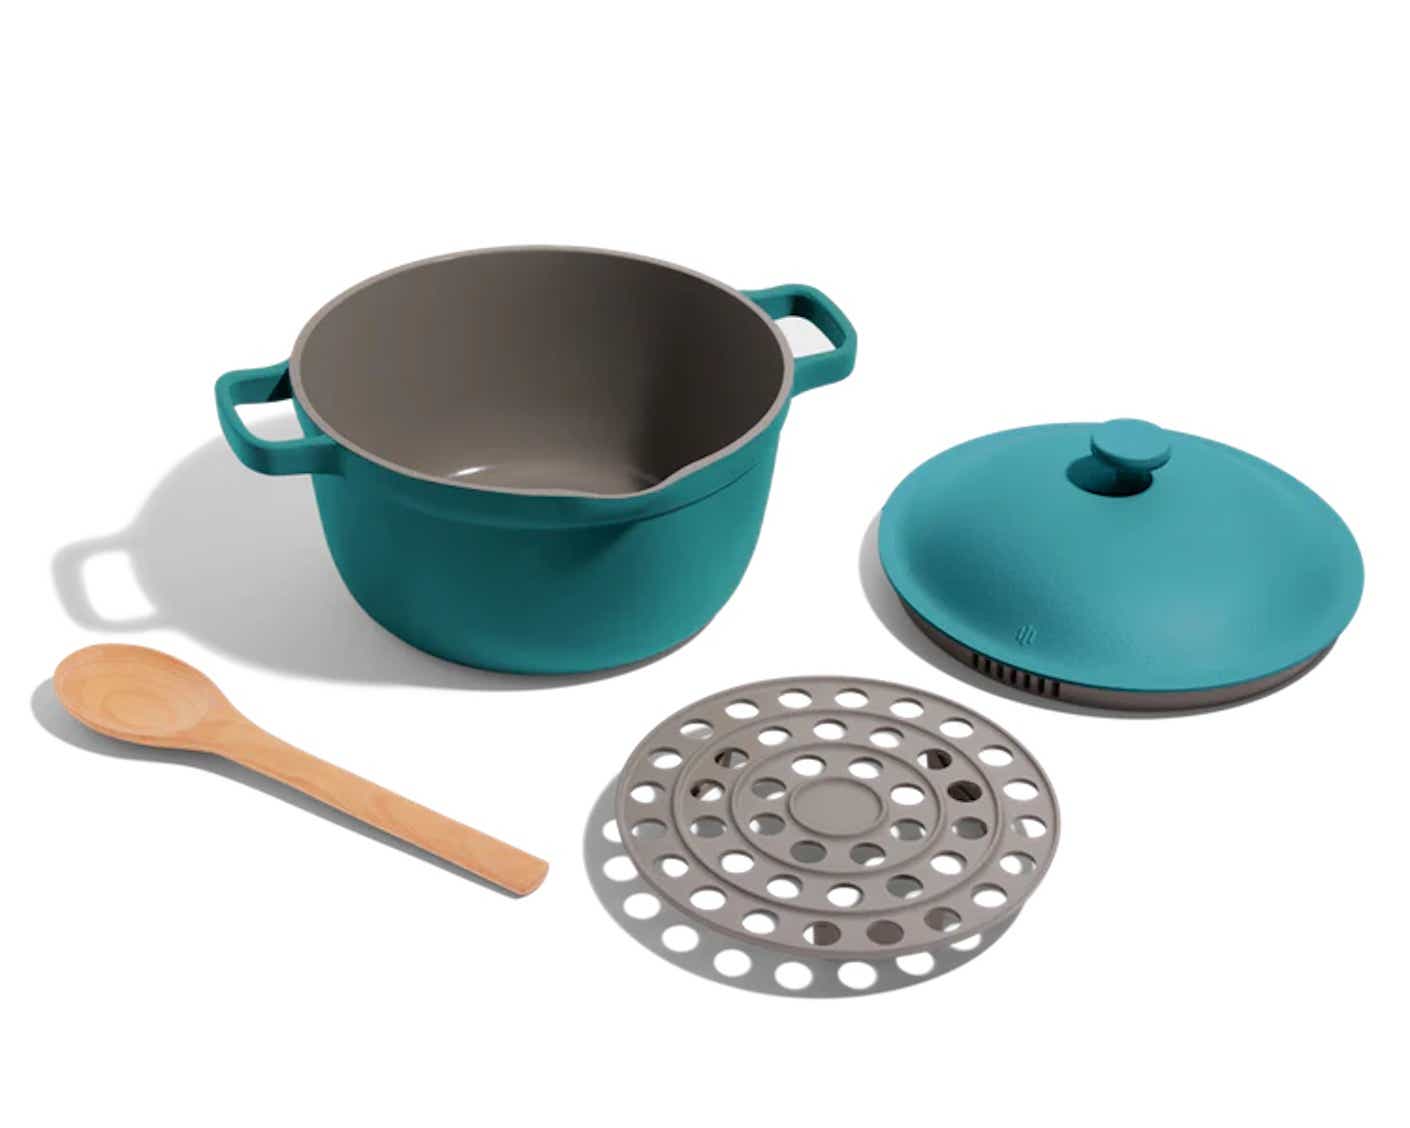 A ceramic Dutch oven, lid, wooden spoon, and metal colander sit together.